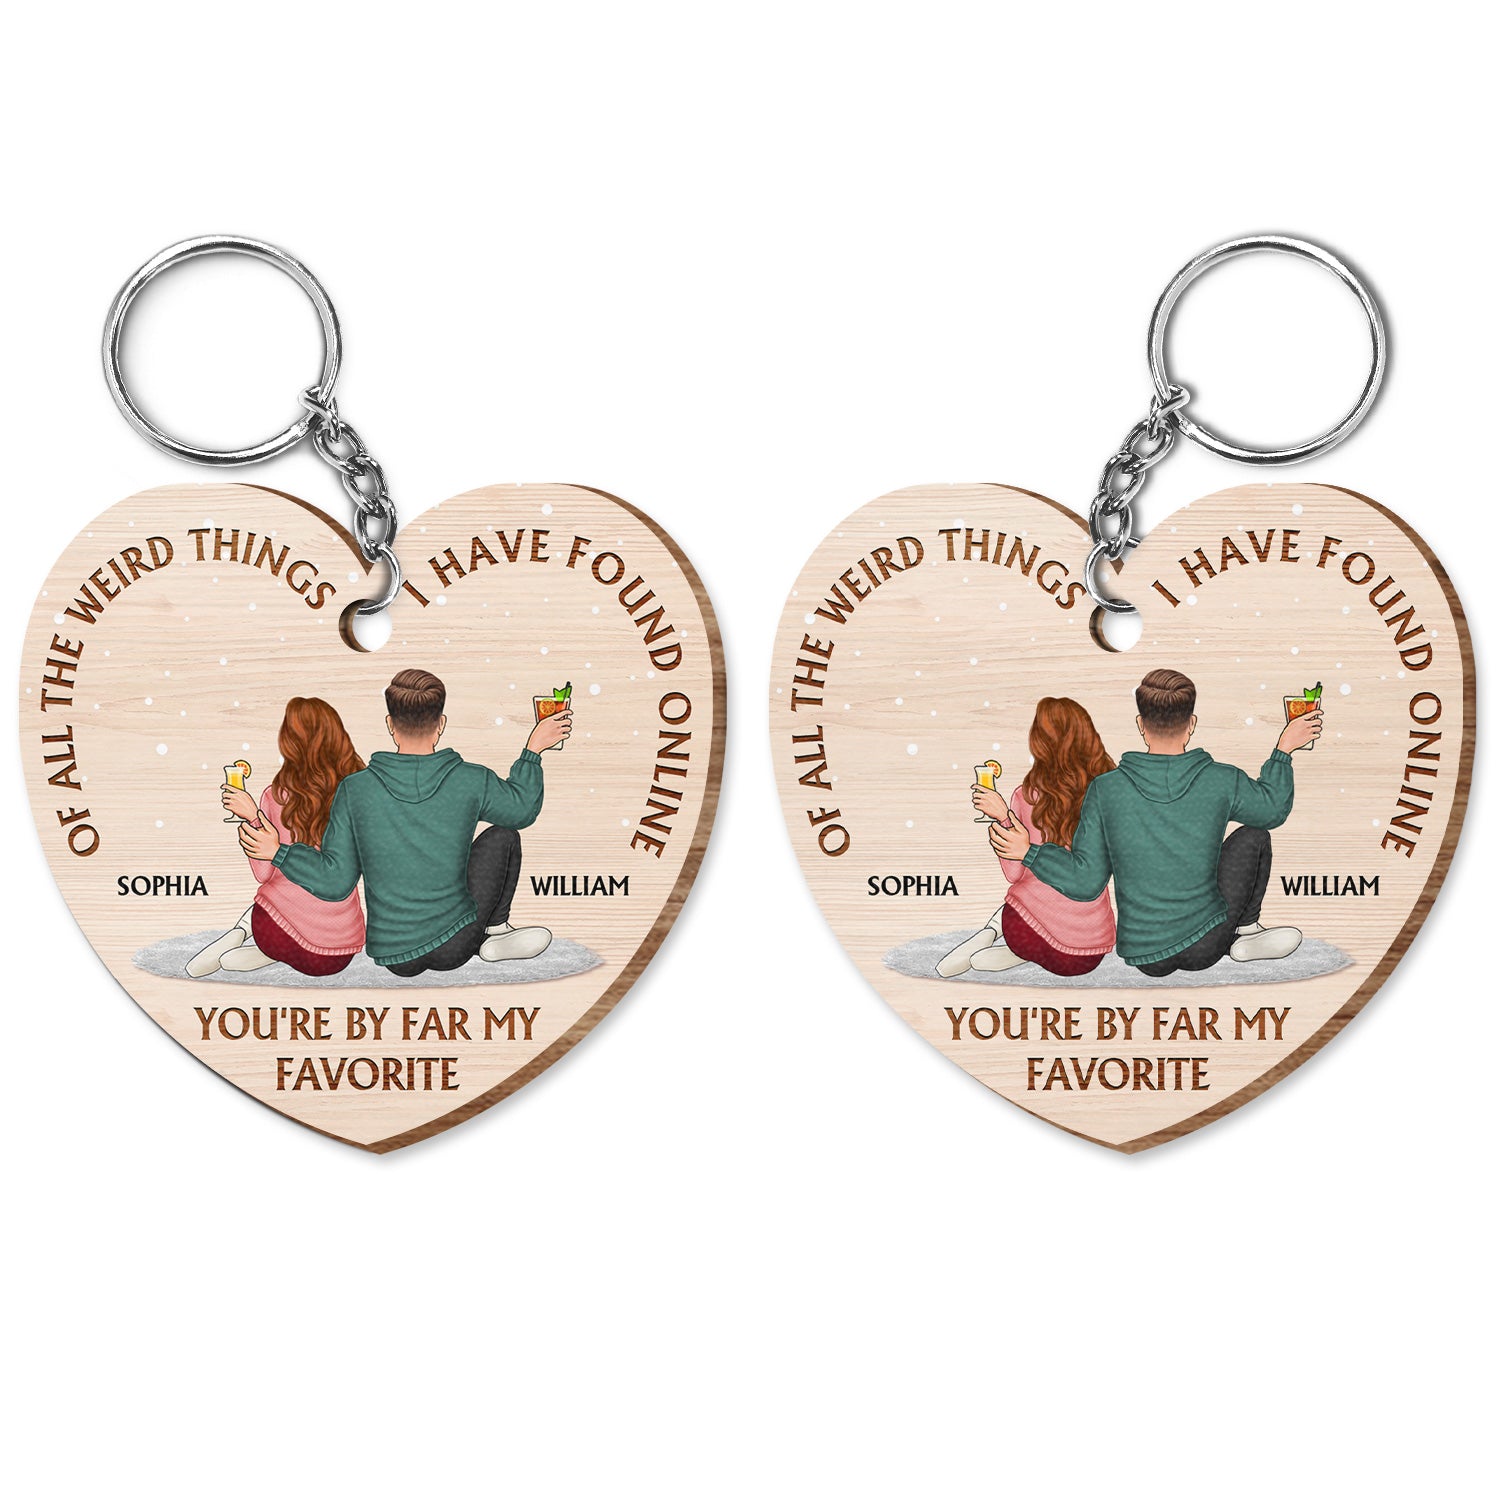 Of All The Weird Things - Gift For Couples, Husband, Wife - Personalized Wooden Keychain